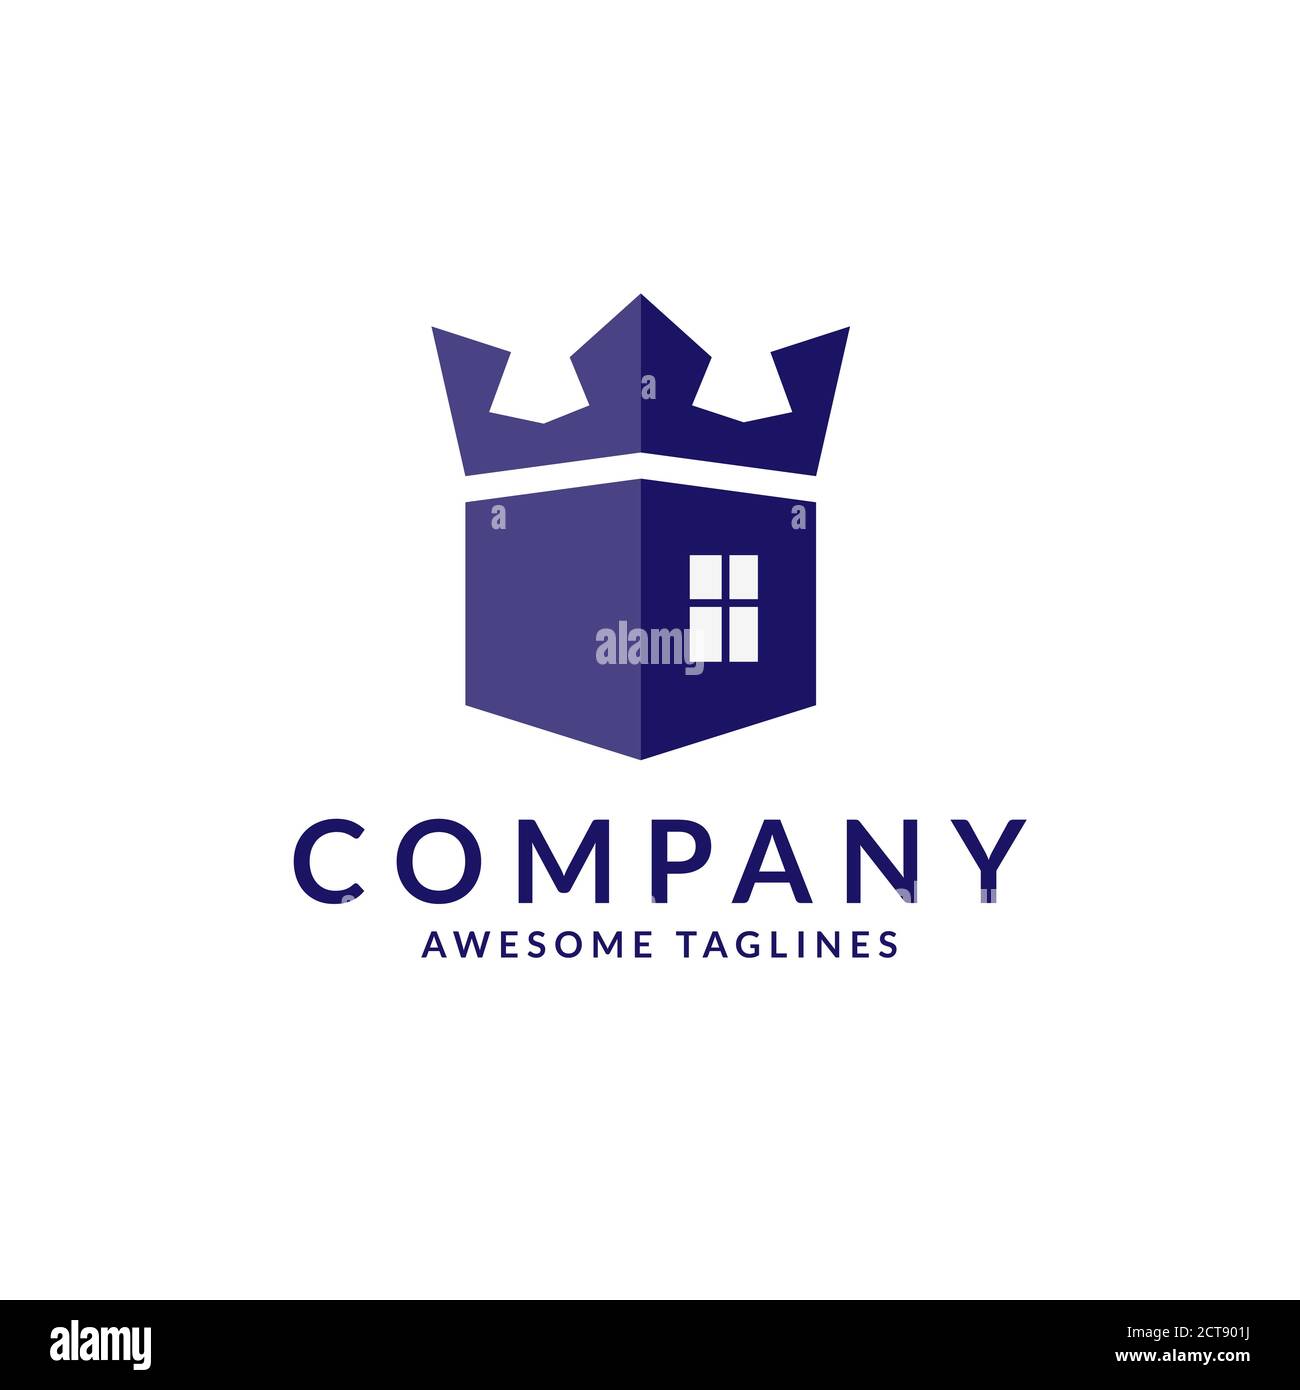 royal house logo with house image as the center part of a crown, Crown house logo design, Luxurious mansion with a crown symbol Stock Vector